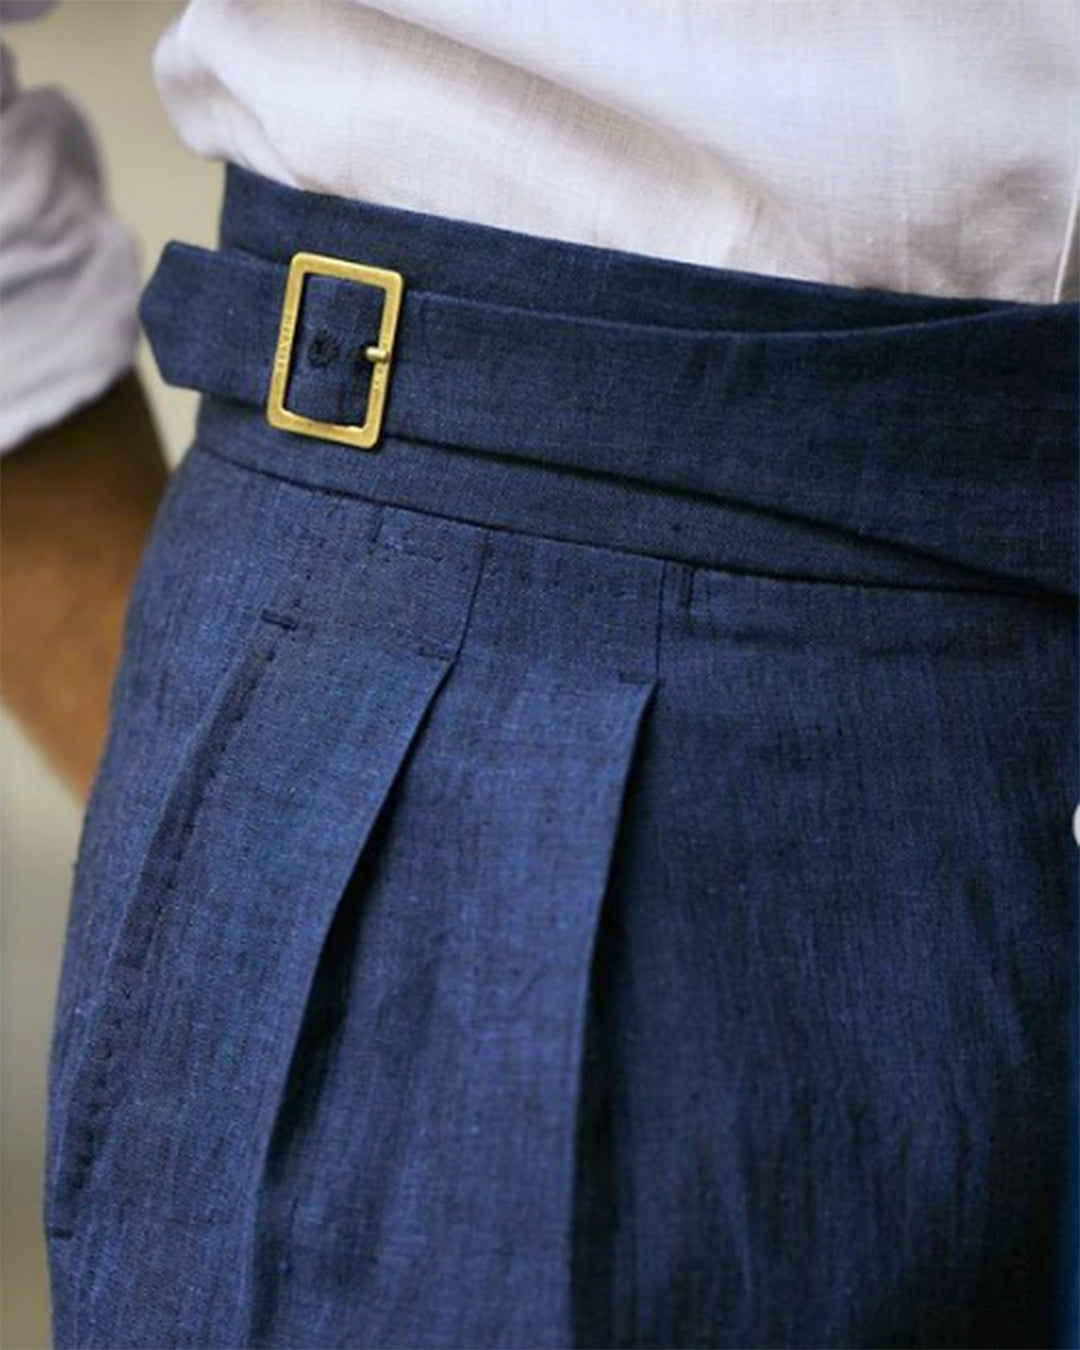 Luxire Review: The Best Made to Measure Gurkha Trousers?